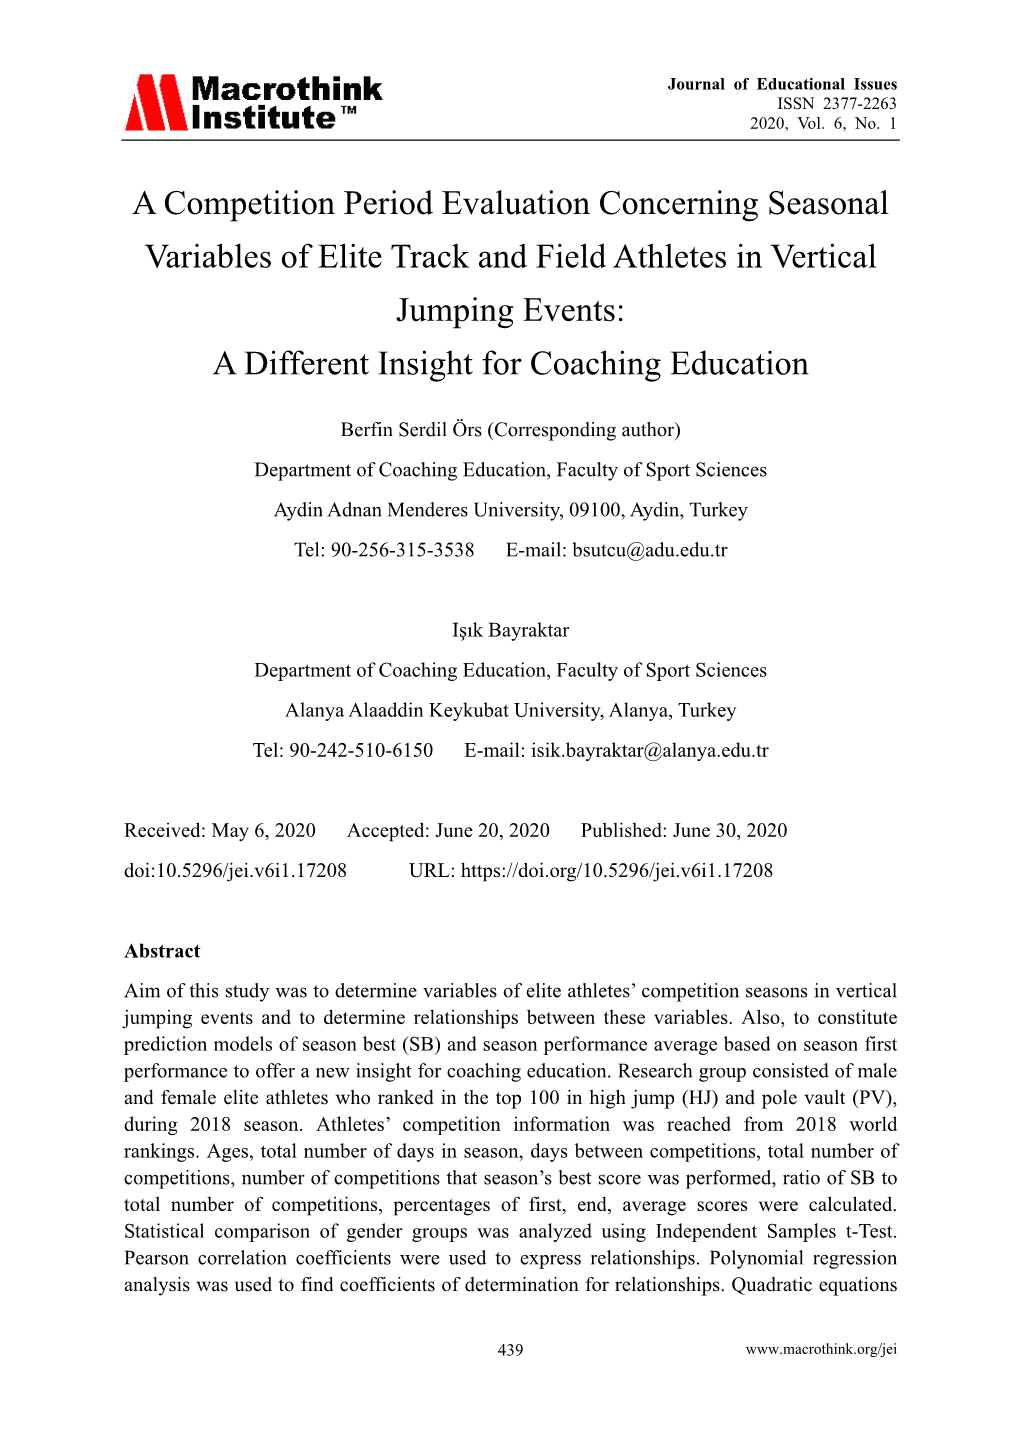 A Competition Period Evaluation Concerning Seasonal Variables of Elite Track and Field Athletes in Vertical Jumping Events